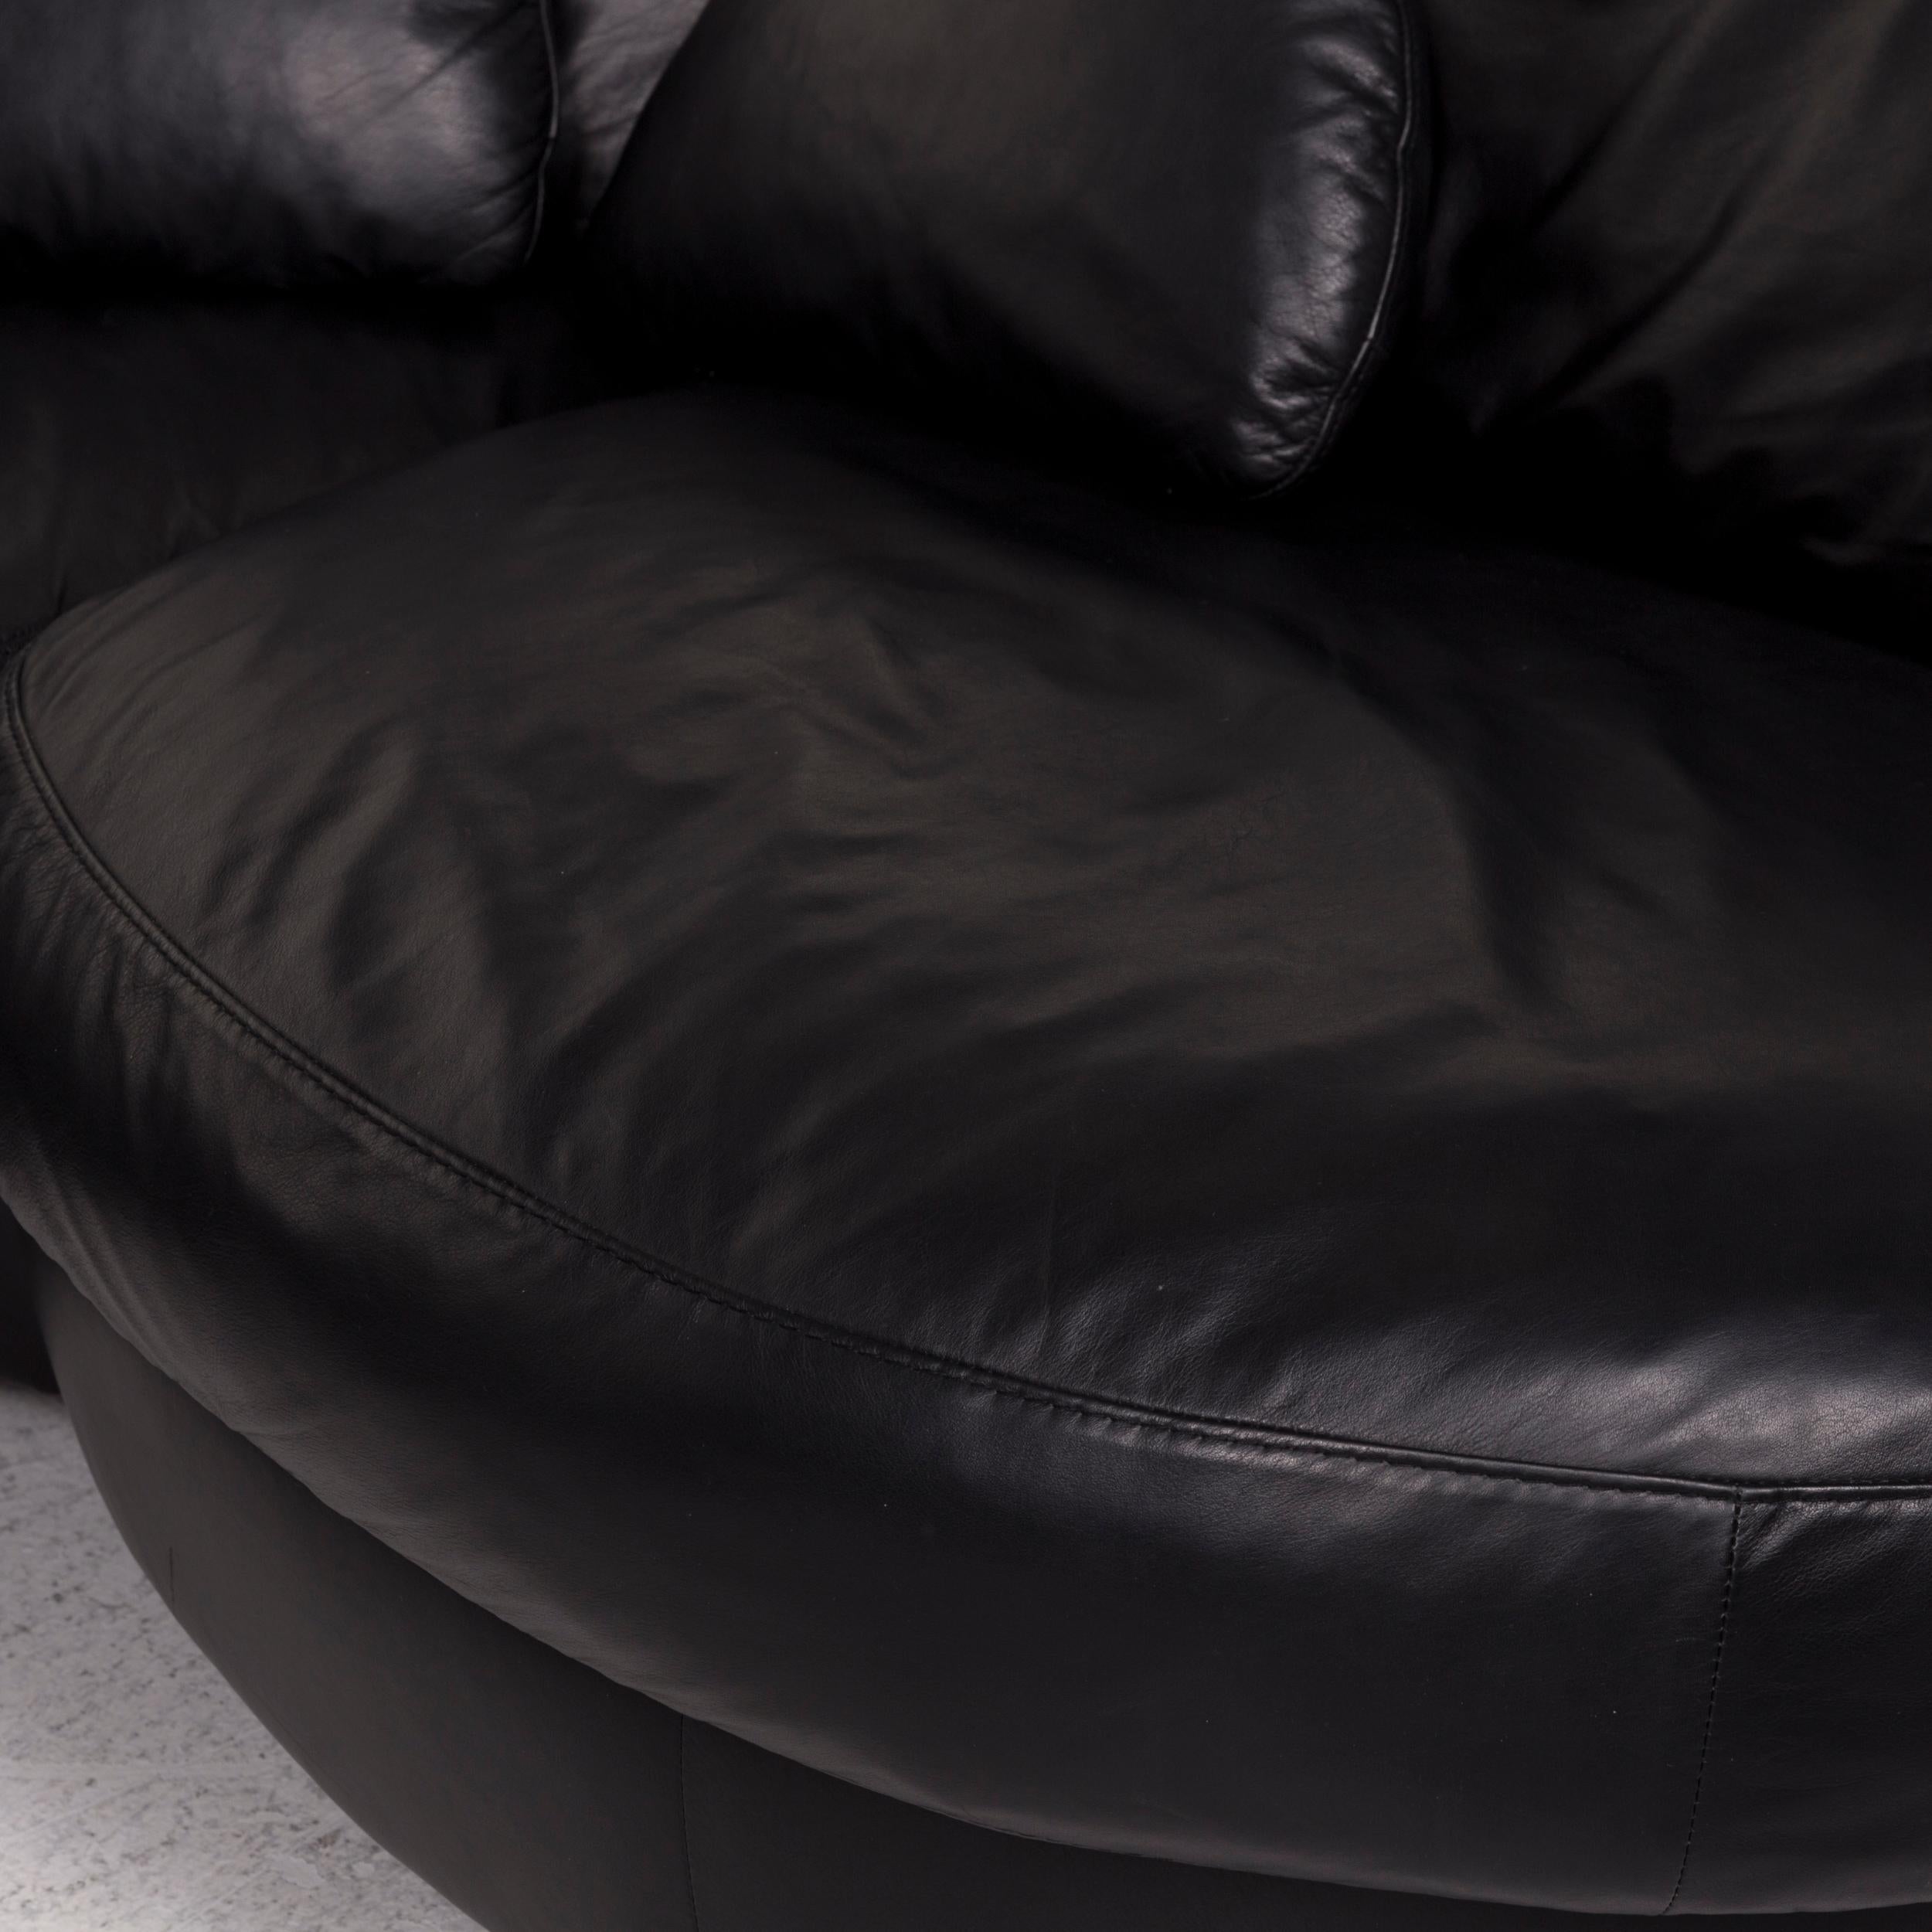 We bring to you a Natuzzi leather corner sofa black sofa couch.

 

 Product measurements in centimeters:
 

 Depth 110
 Width 319
 Height 88
 Seat-height 46
 Rest-height 66
 Seat-depth 43
 Seat-width 212
 Back-height 37.
 